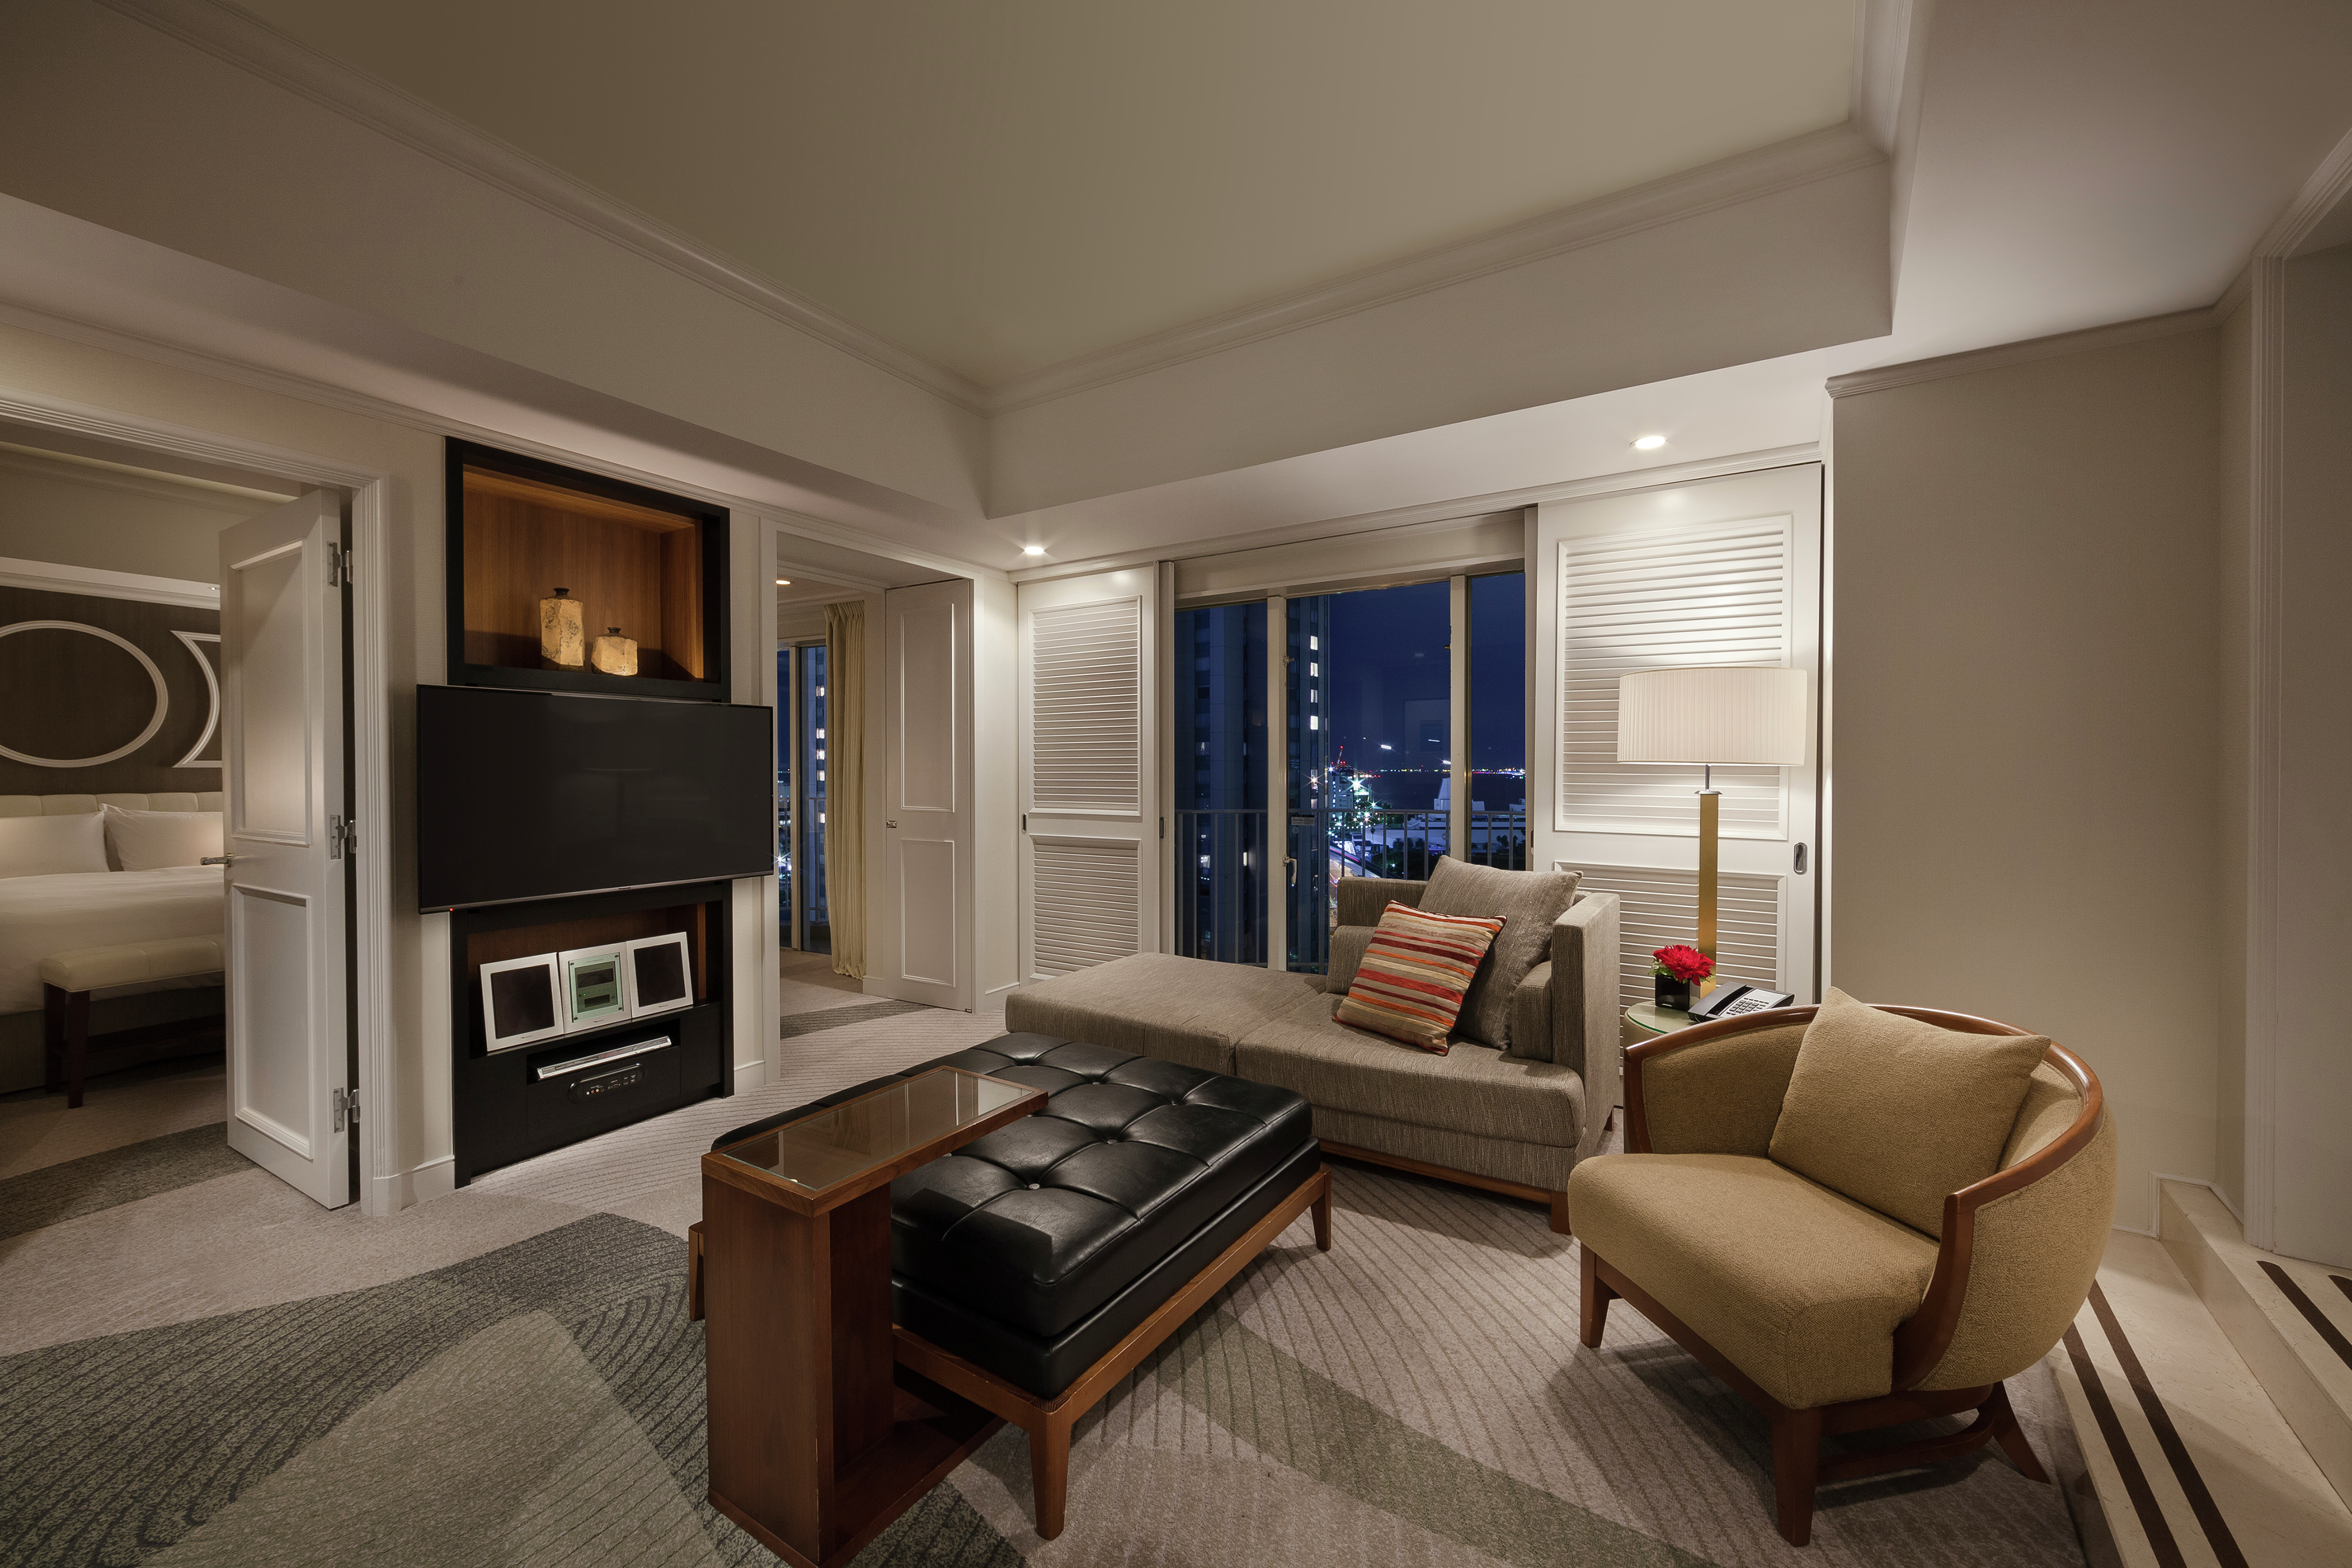 Suite with Terrace, Lounge Area, Outside View, and Room Technology